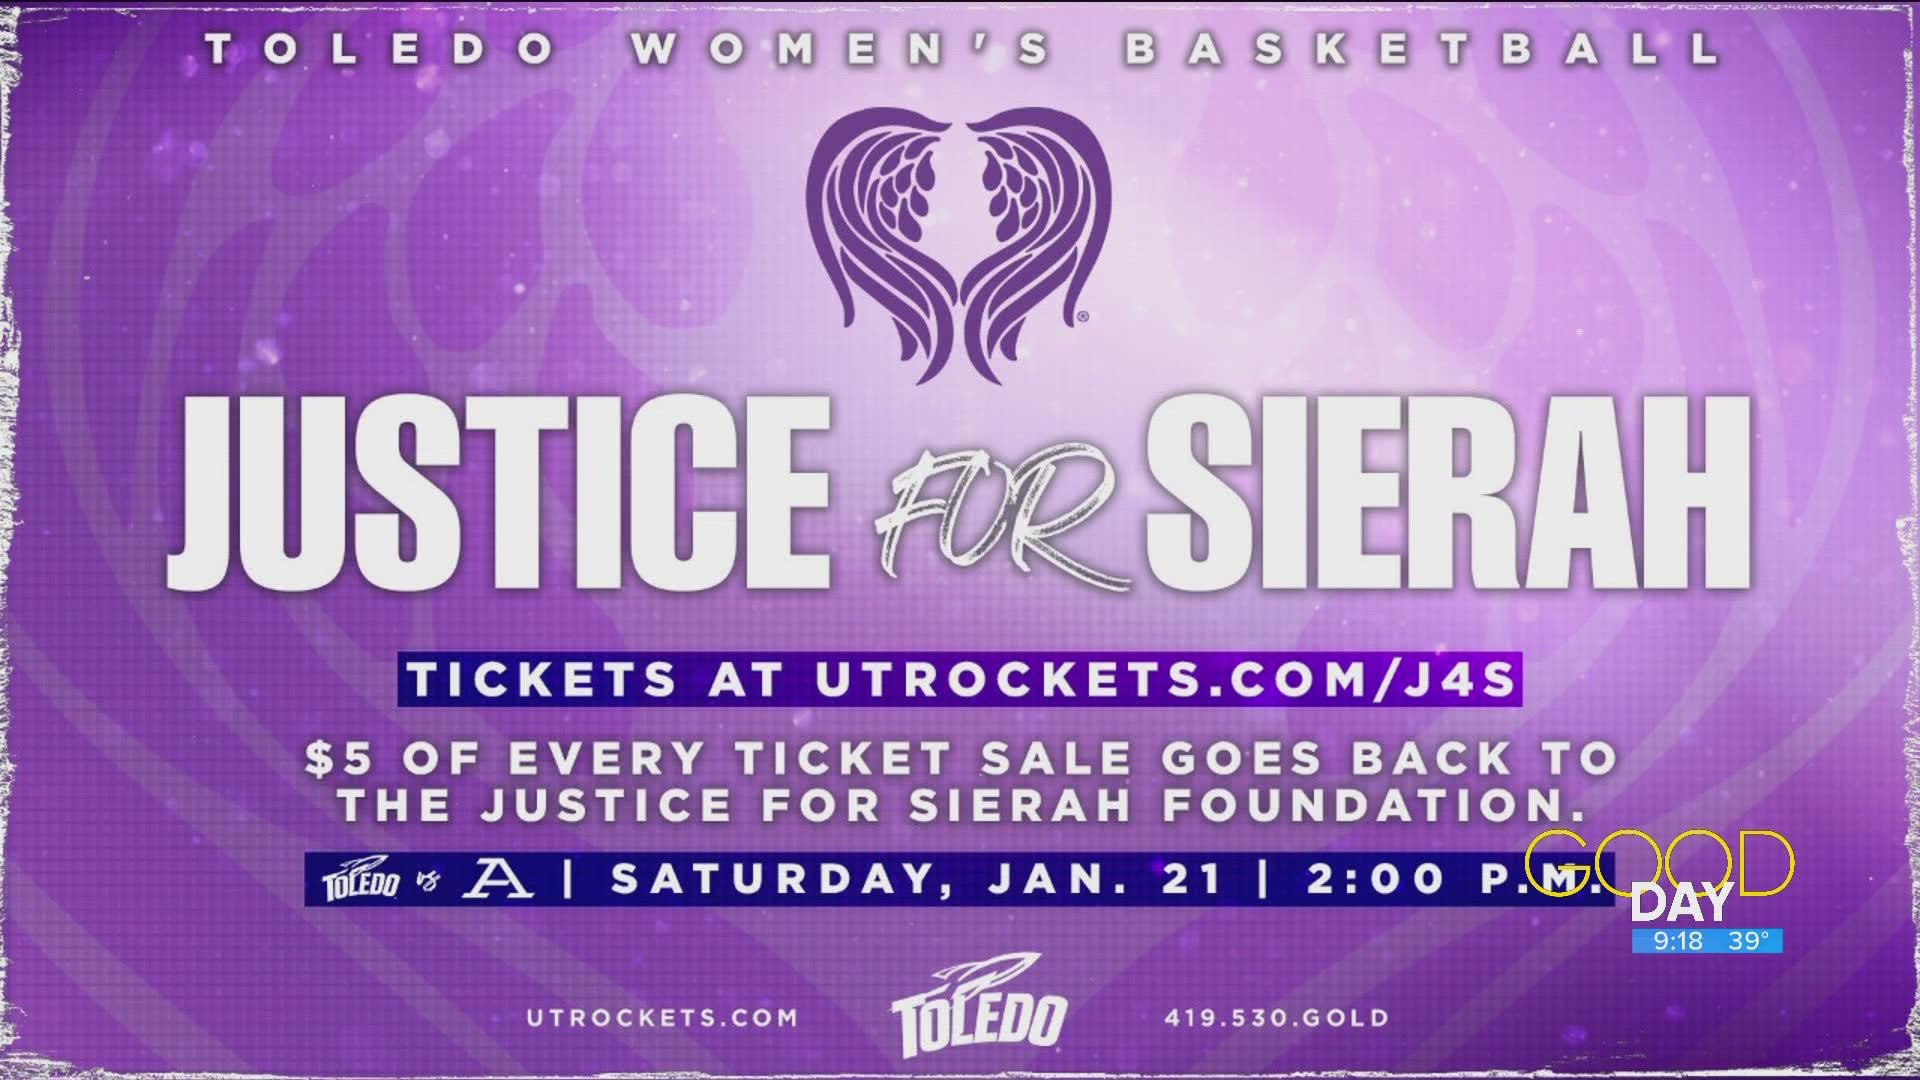 Toledo Women's Basketball is dedicating their upcoming Saturday game to The Justice for Sierah Foundation.